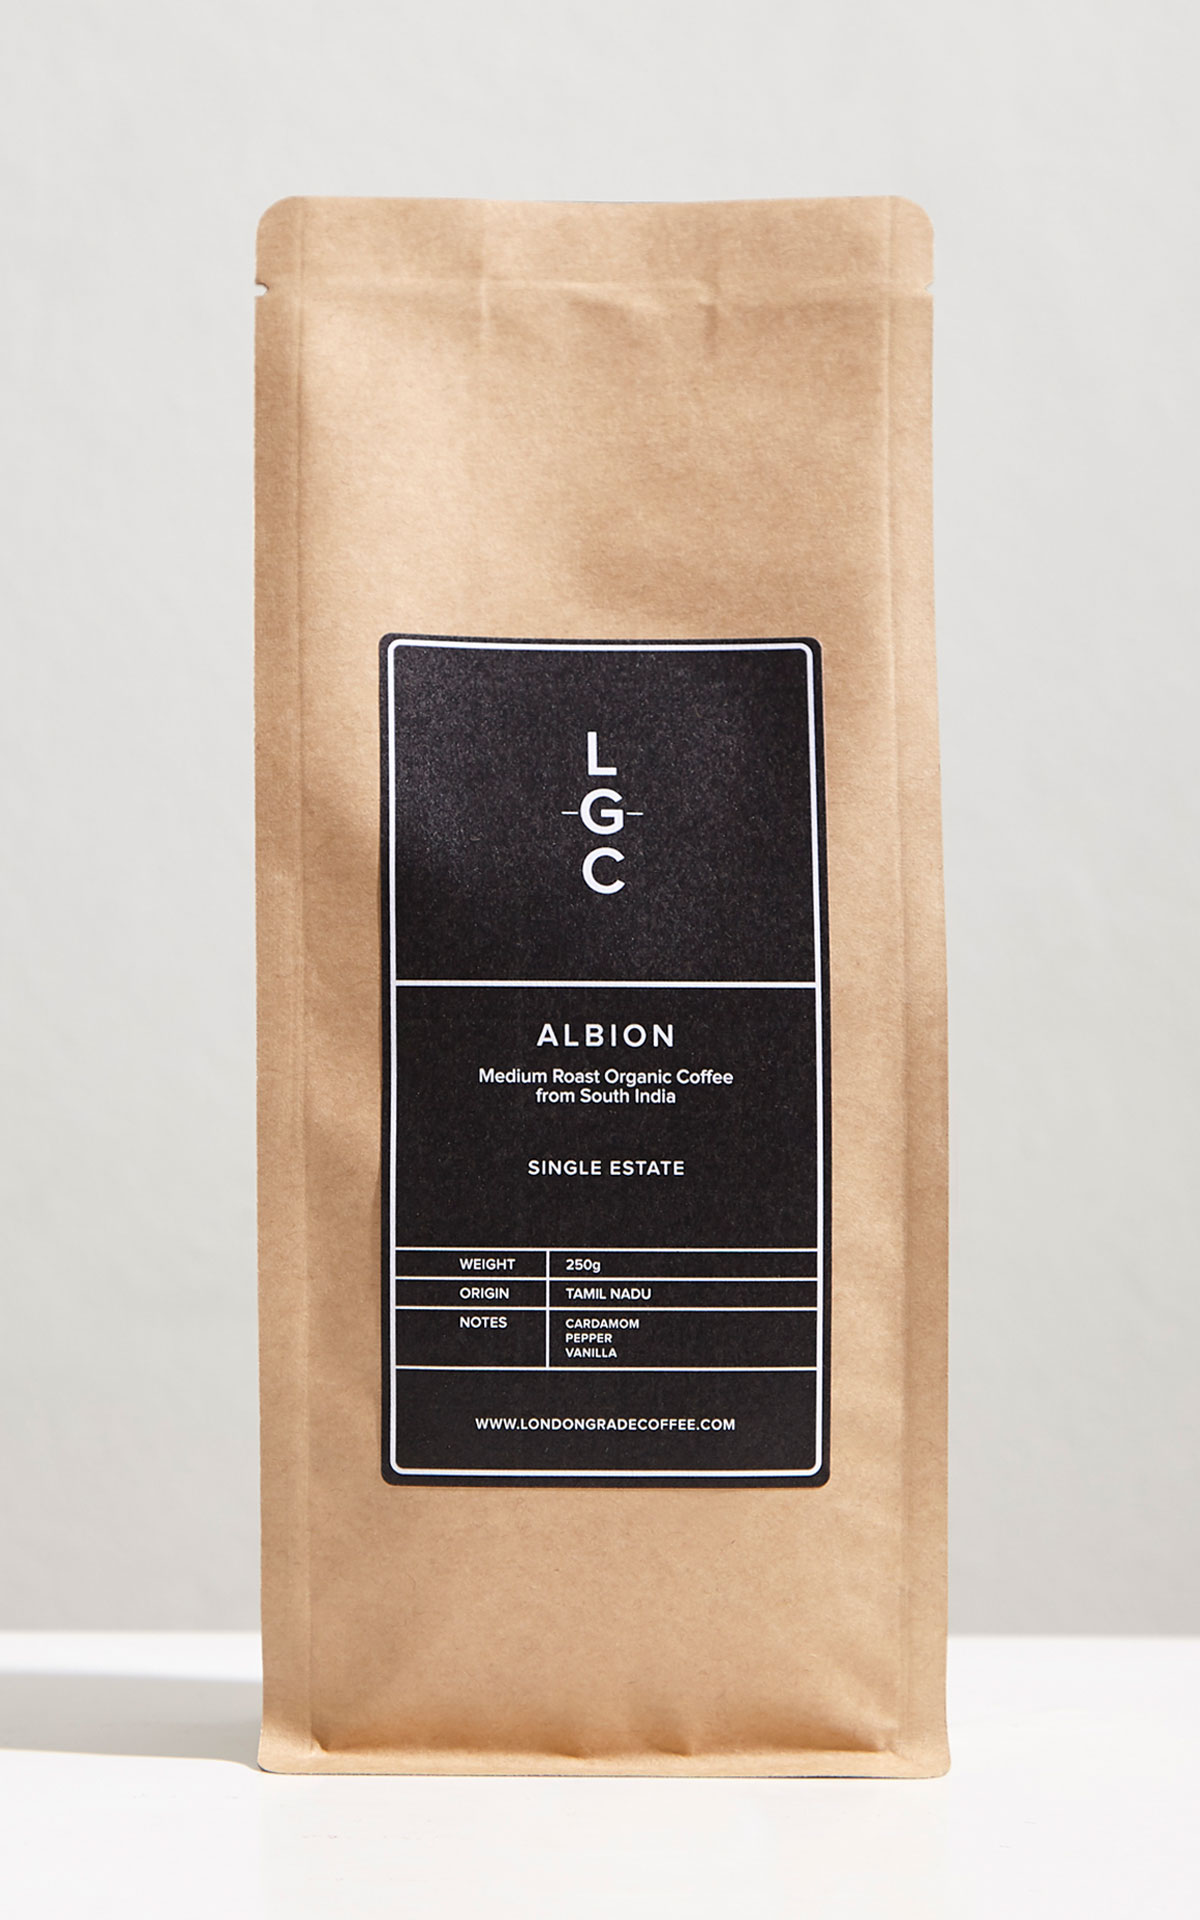 London Grade Coffee Albion coffee 250g from Bicester Village